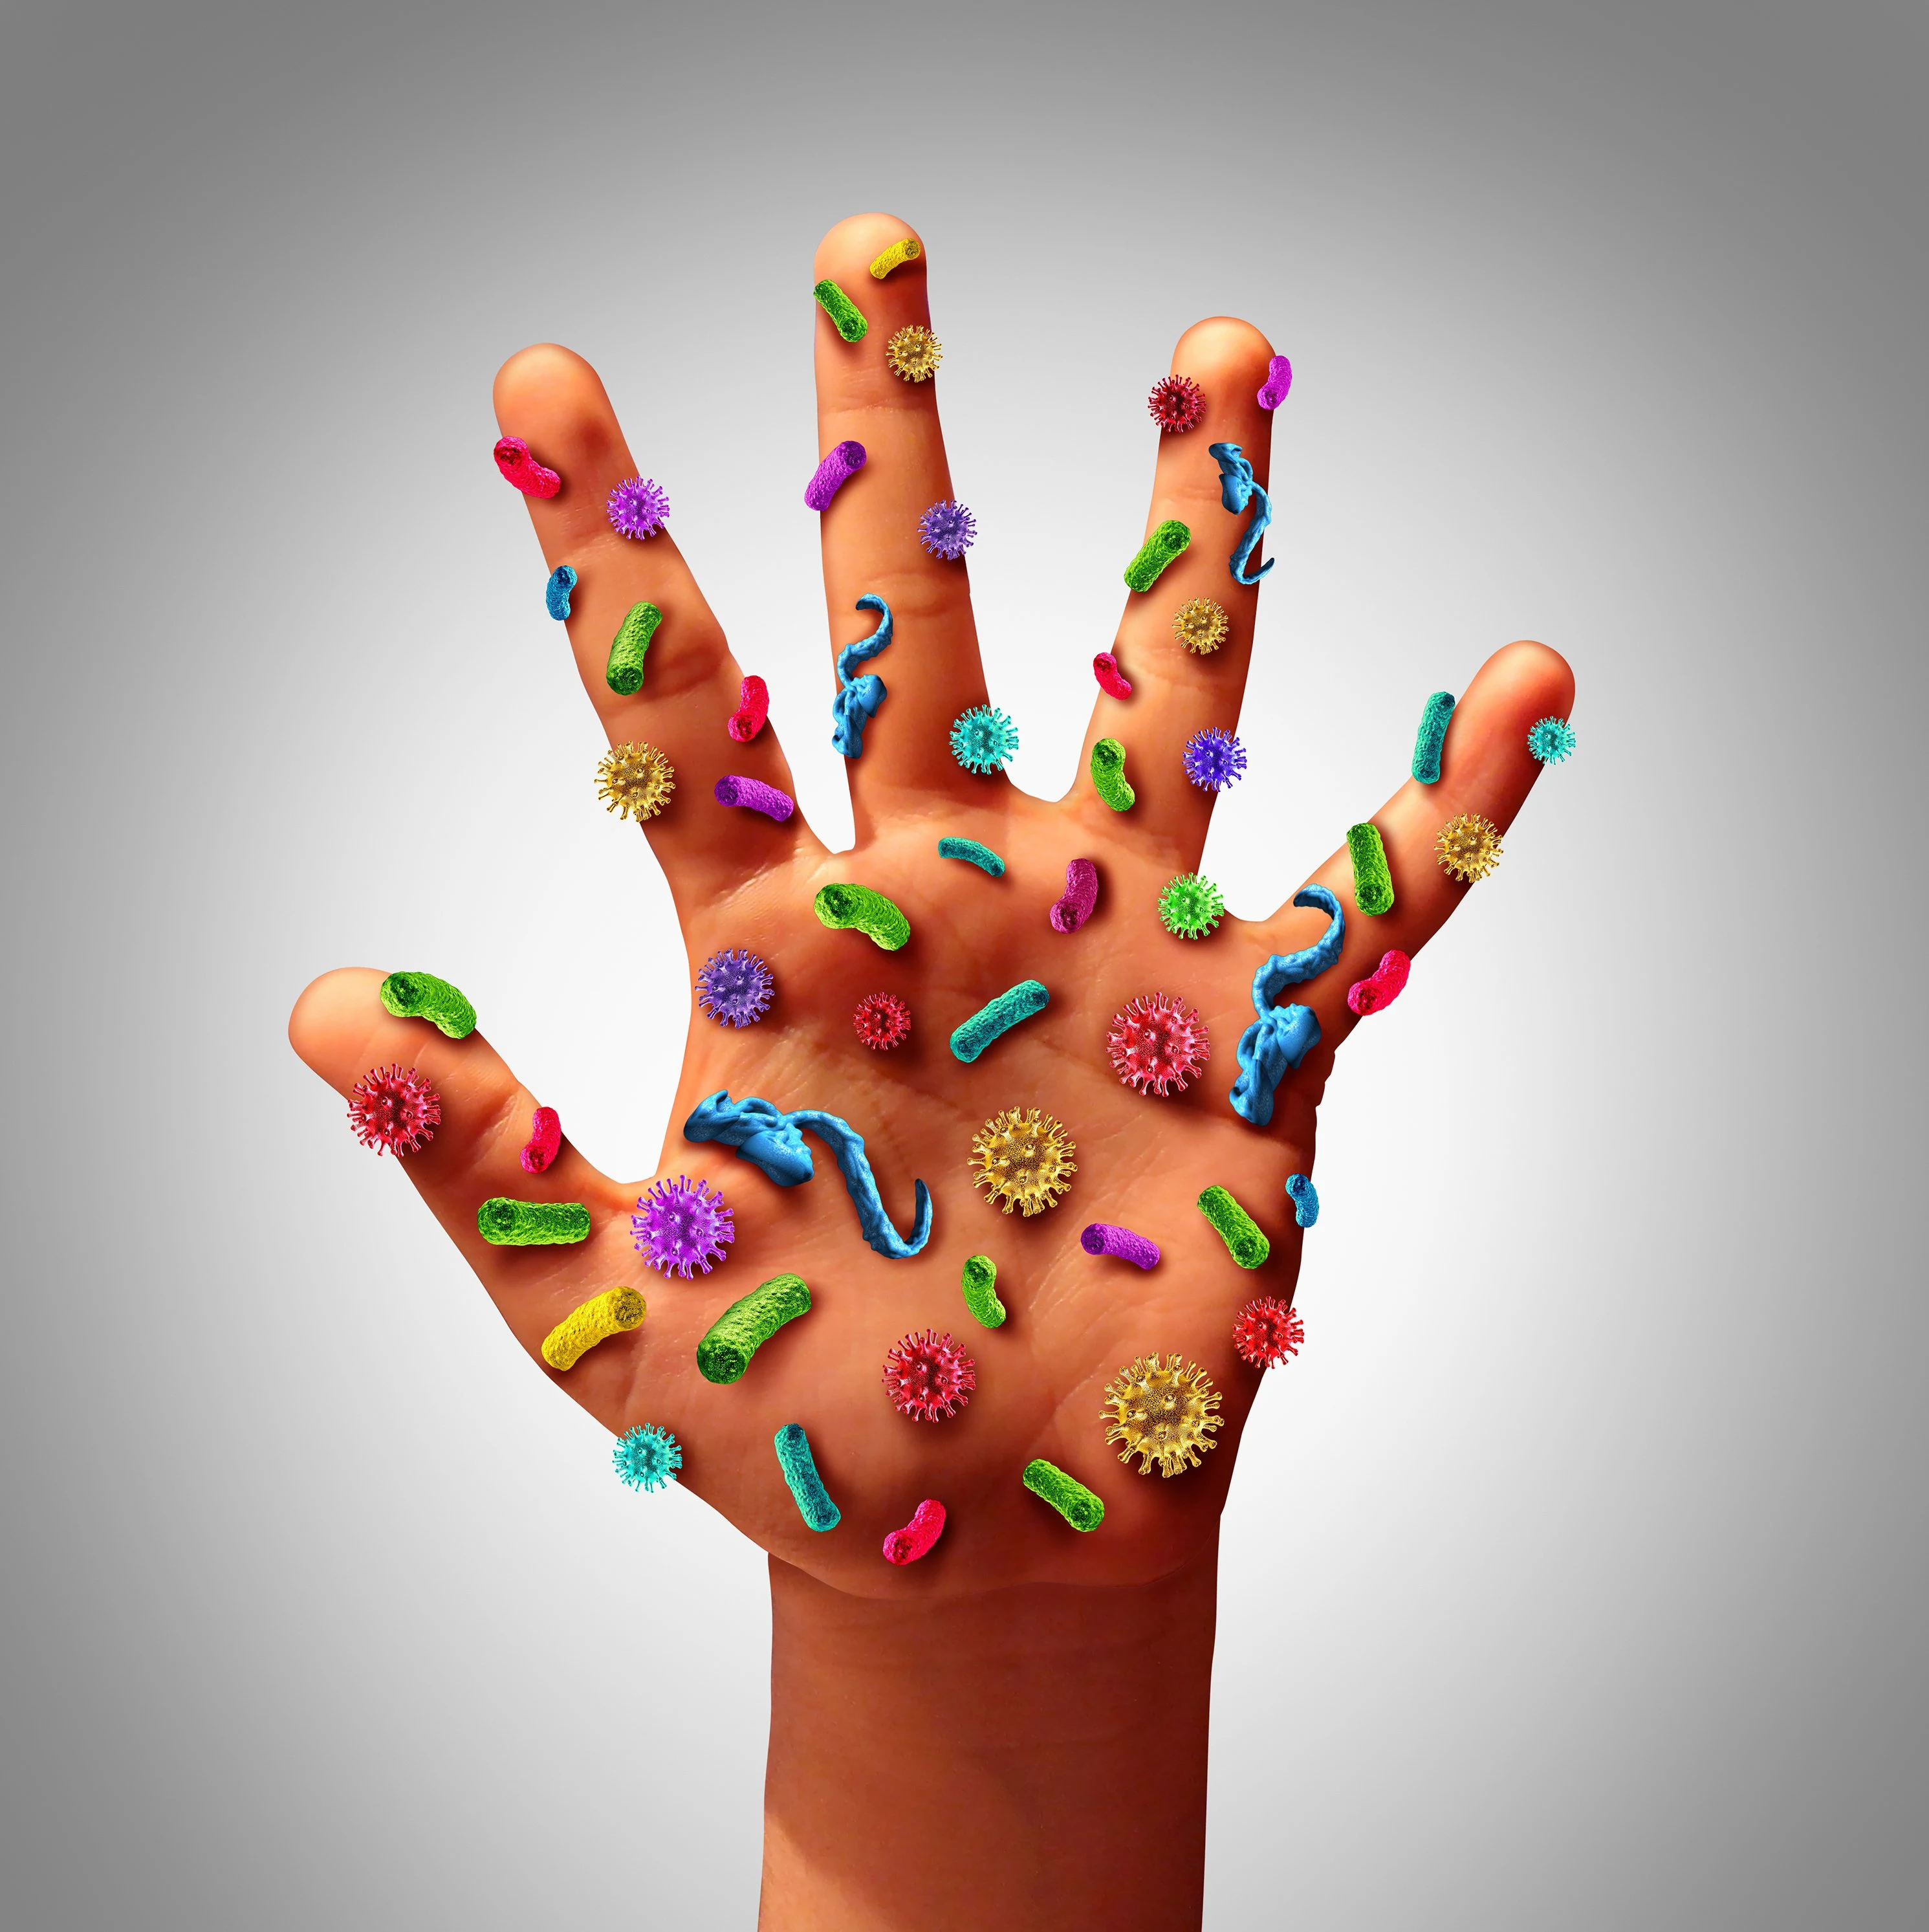 "Hand Washing for kids" image of a hand covered with cartoon germs.